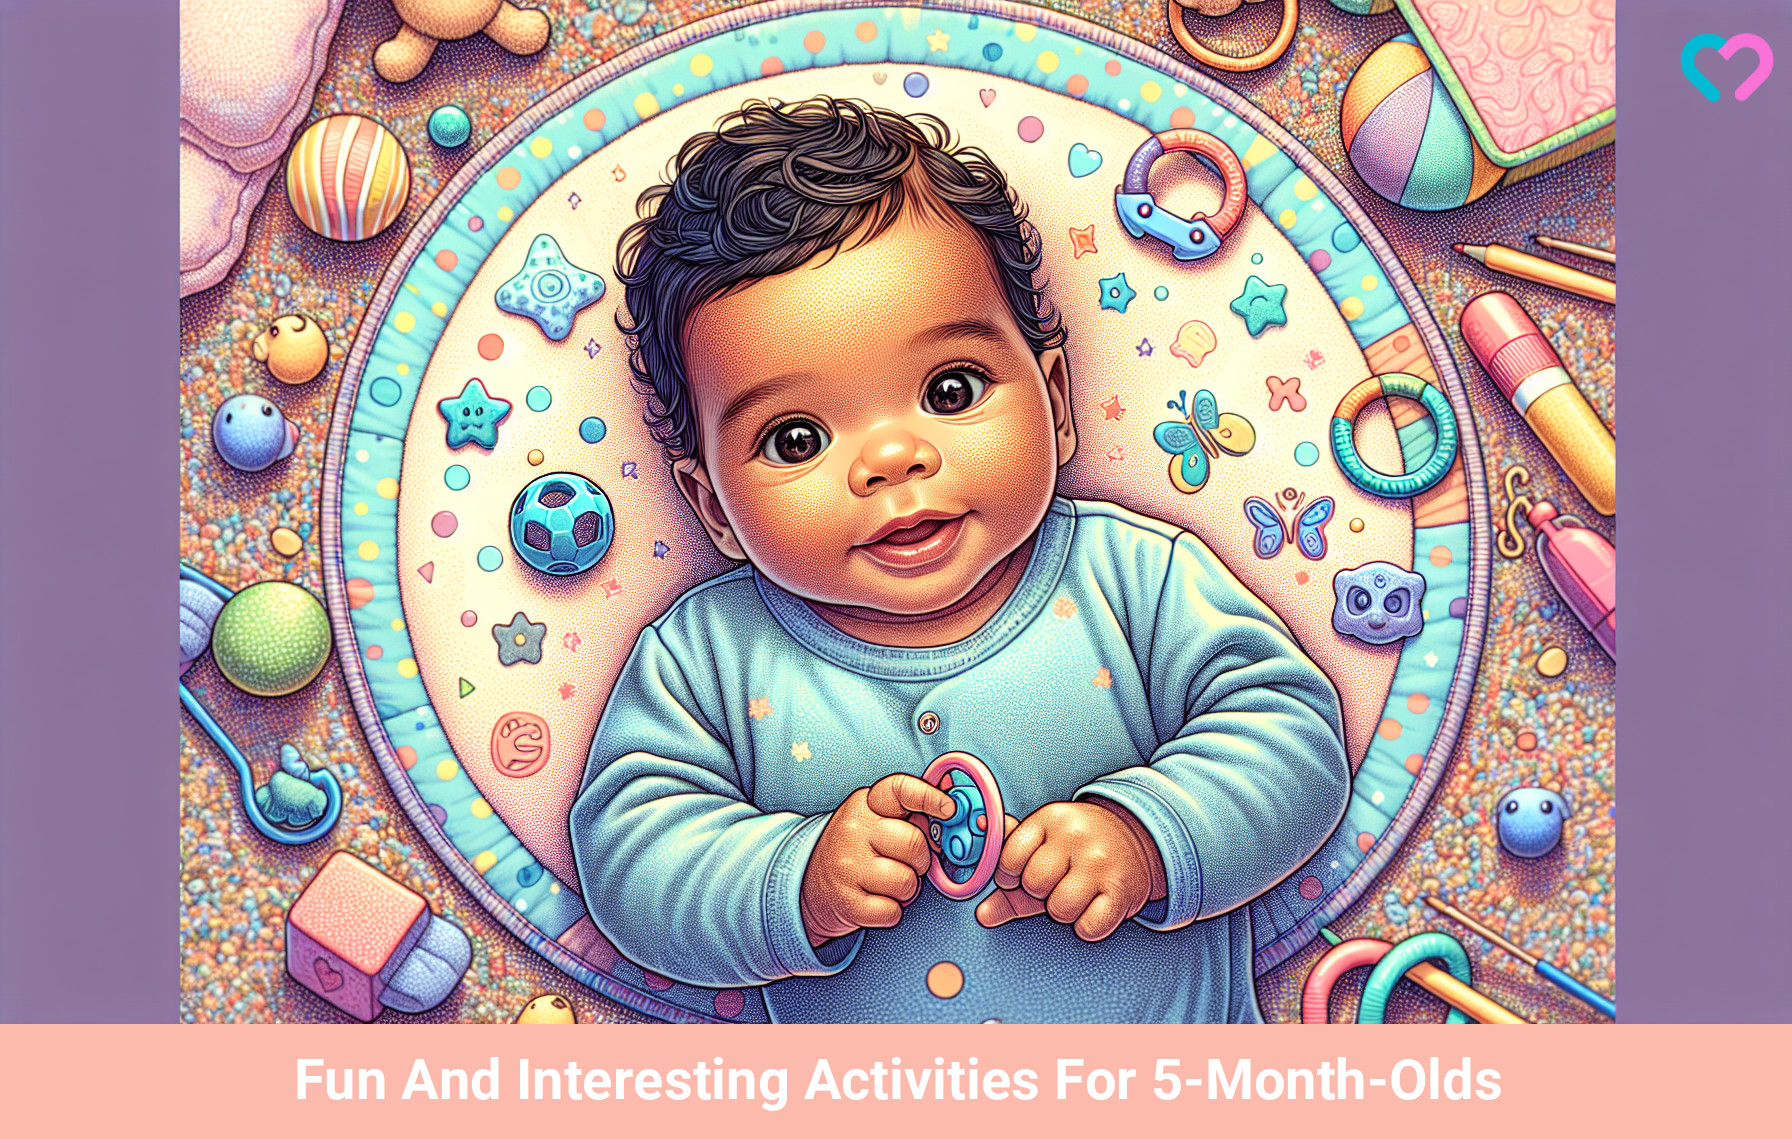 Activities For 5-Month-Olds_illustration